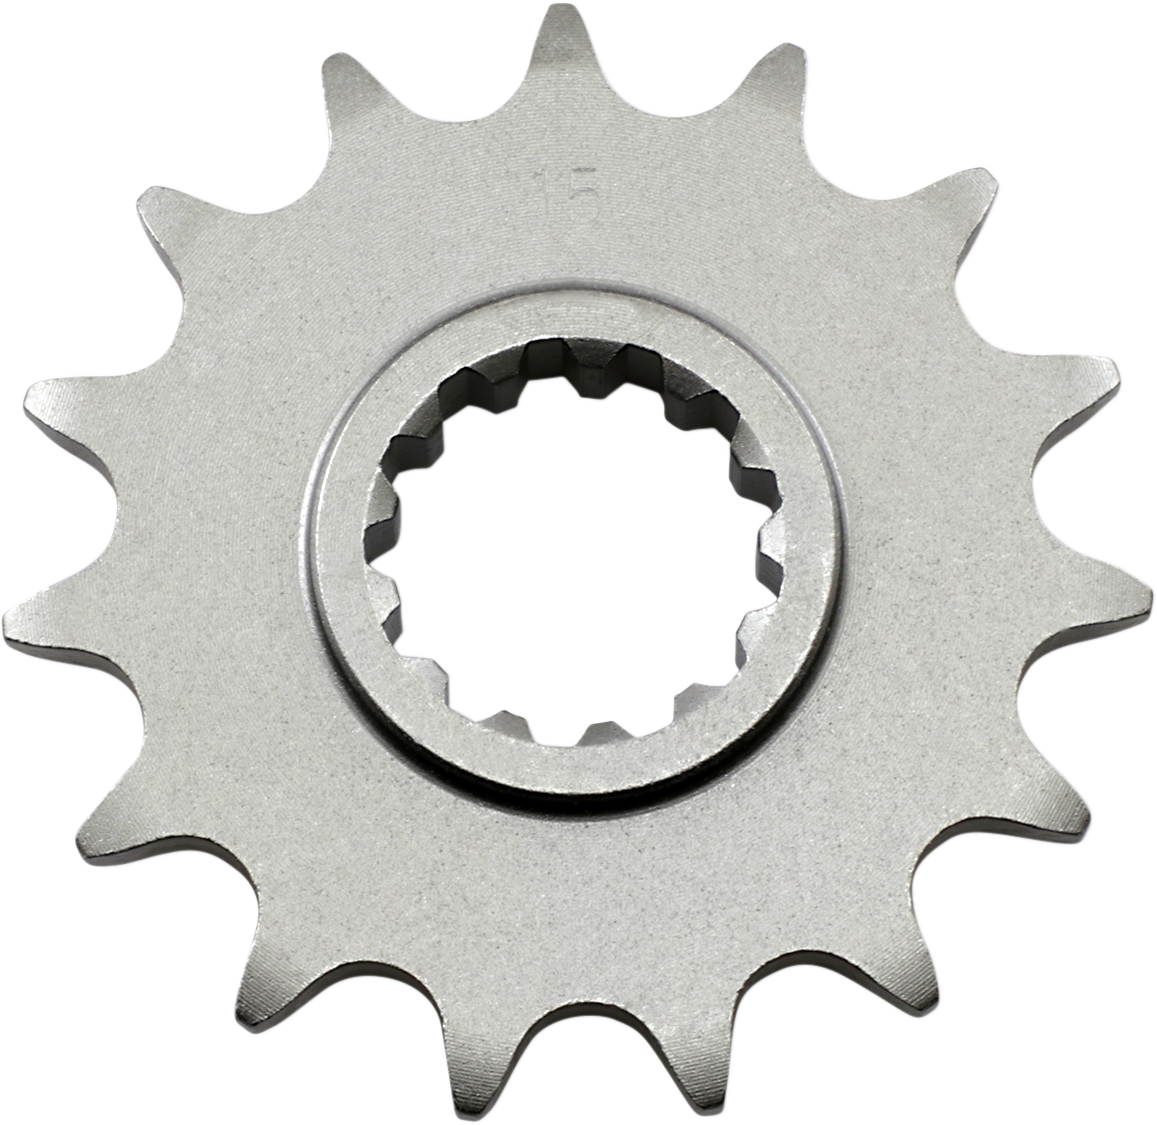 Parts Unlimited Countershaft Sprocket - 16-Tooth 4xv-17460-0016